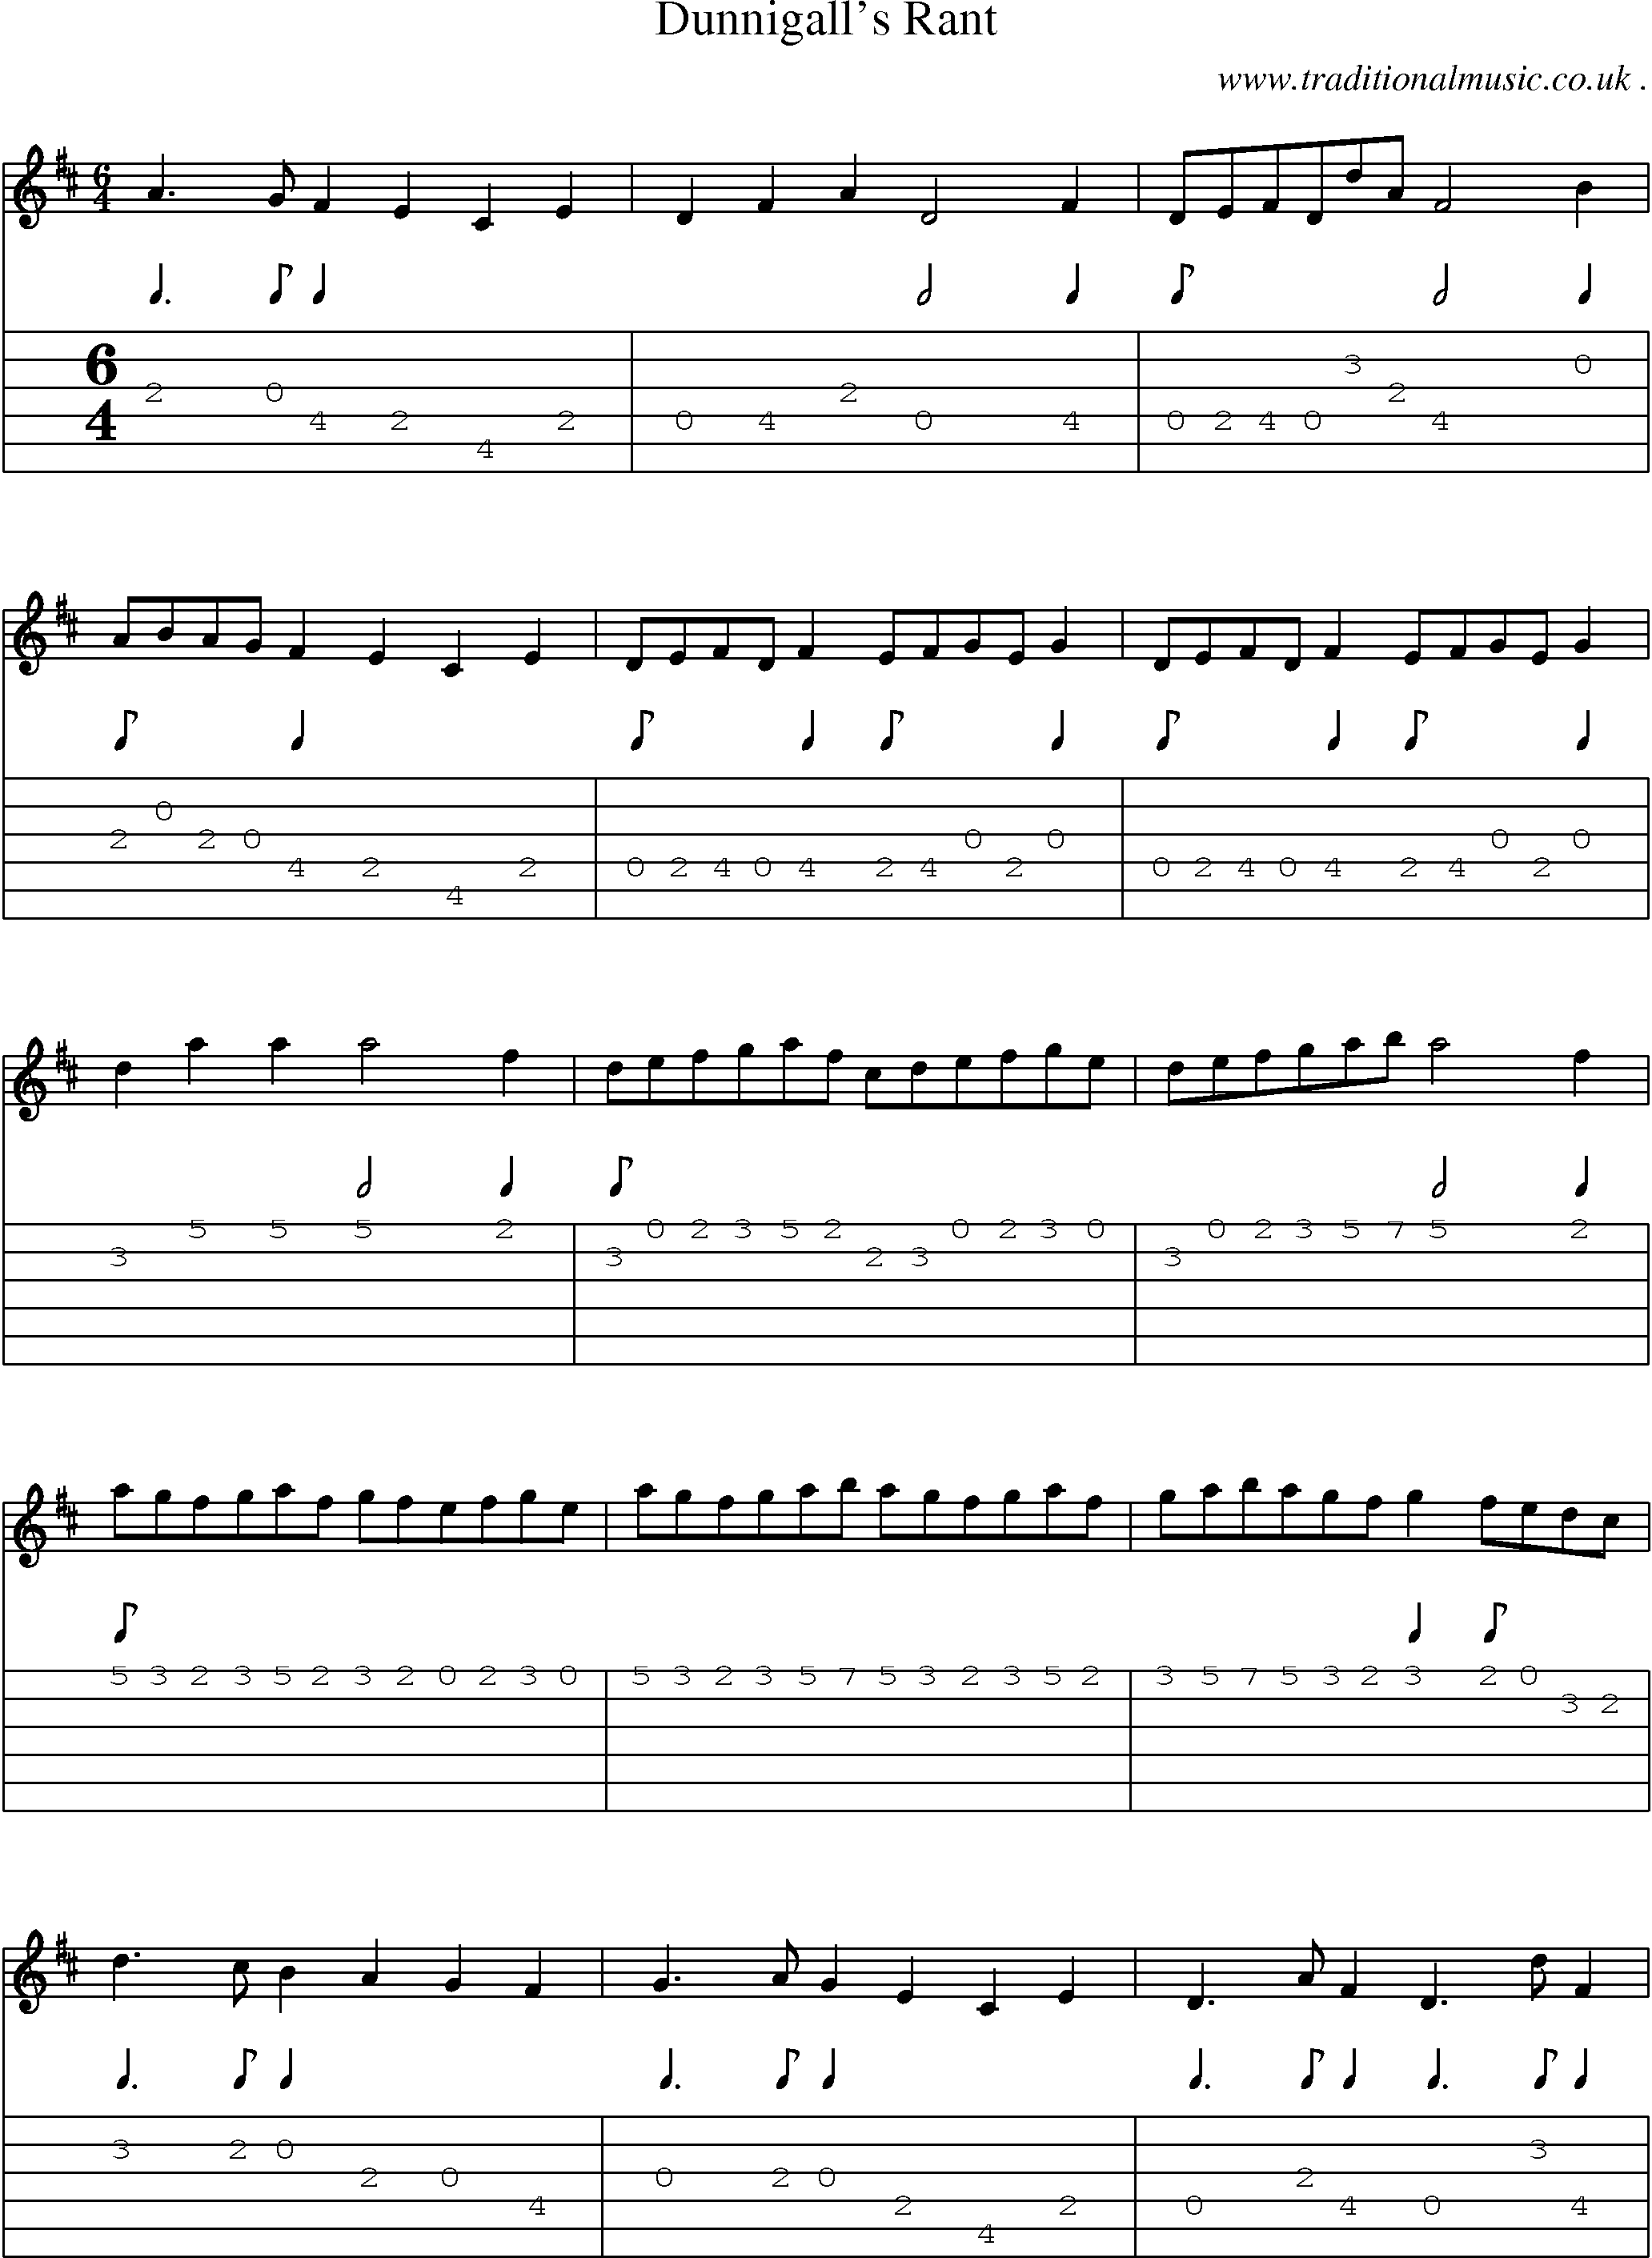 Sheet-music  score, Chords and Guitar Tabs for Dunnigalls Rant